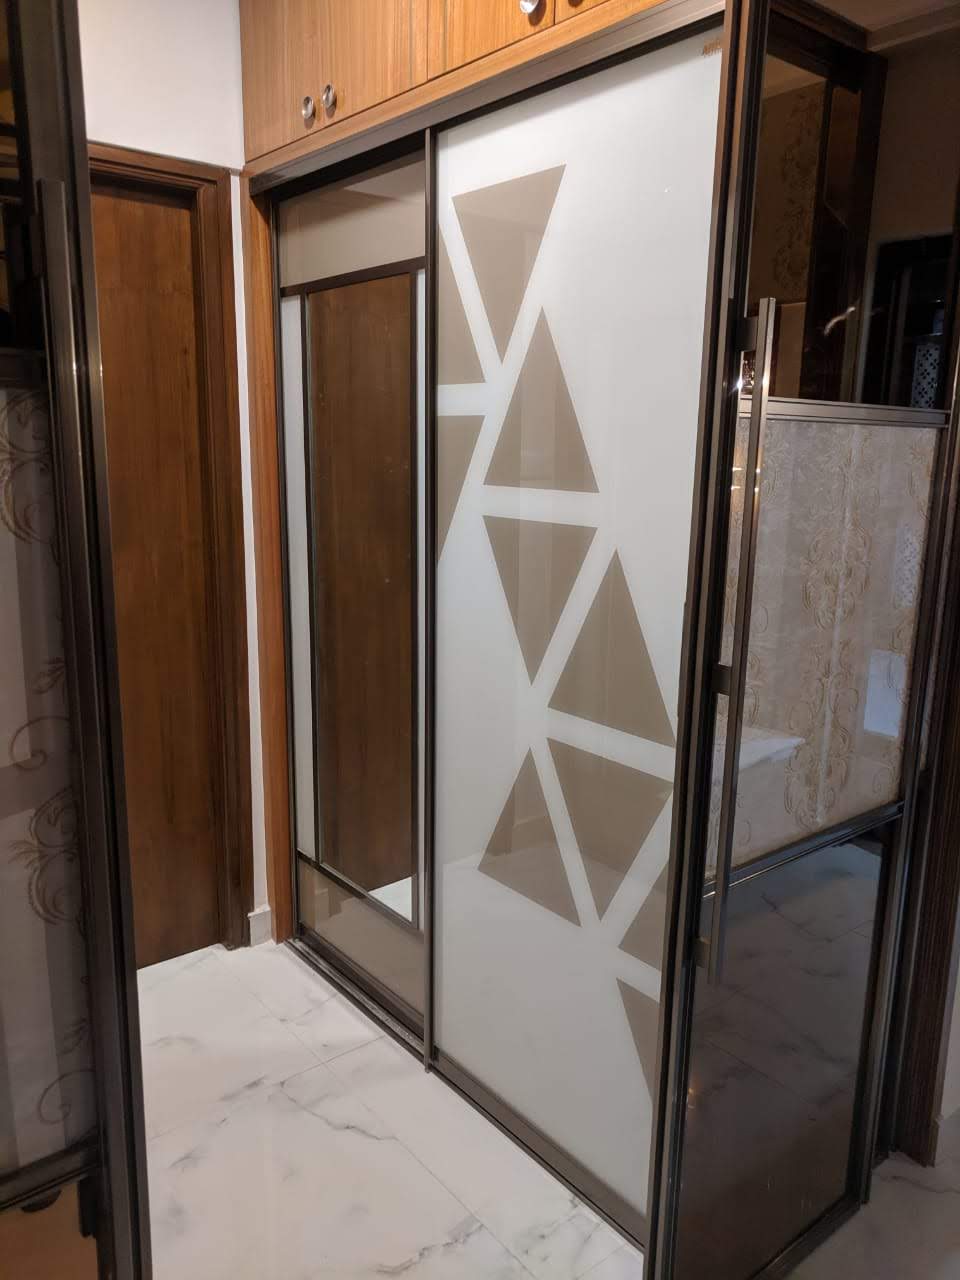 select-your-lacquer-glass-wardrobe-today-in-gurgaon-largest-manufacturing-brand-in-gurugram-gurgaon-india